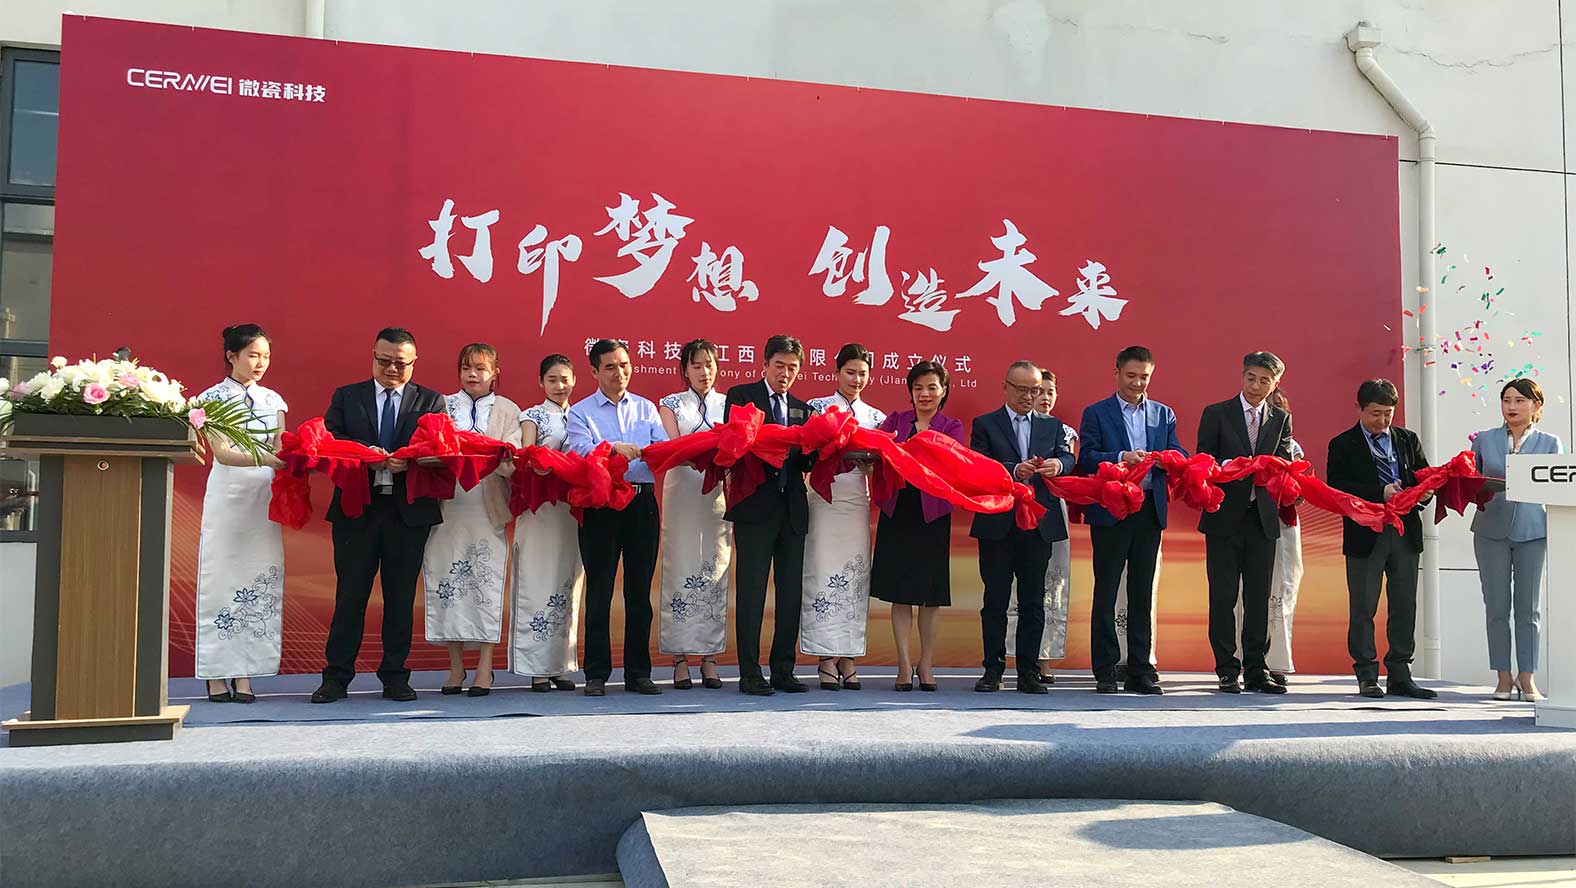 An opening ceremony of the new joint venture, a binder-jet 3D printer business located in China